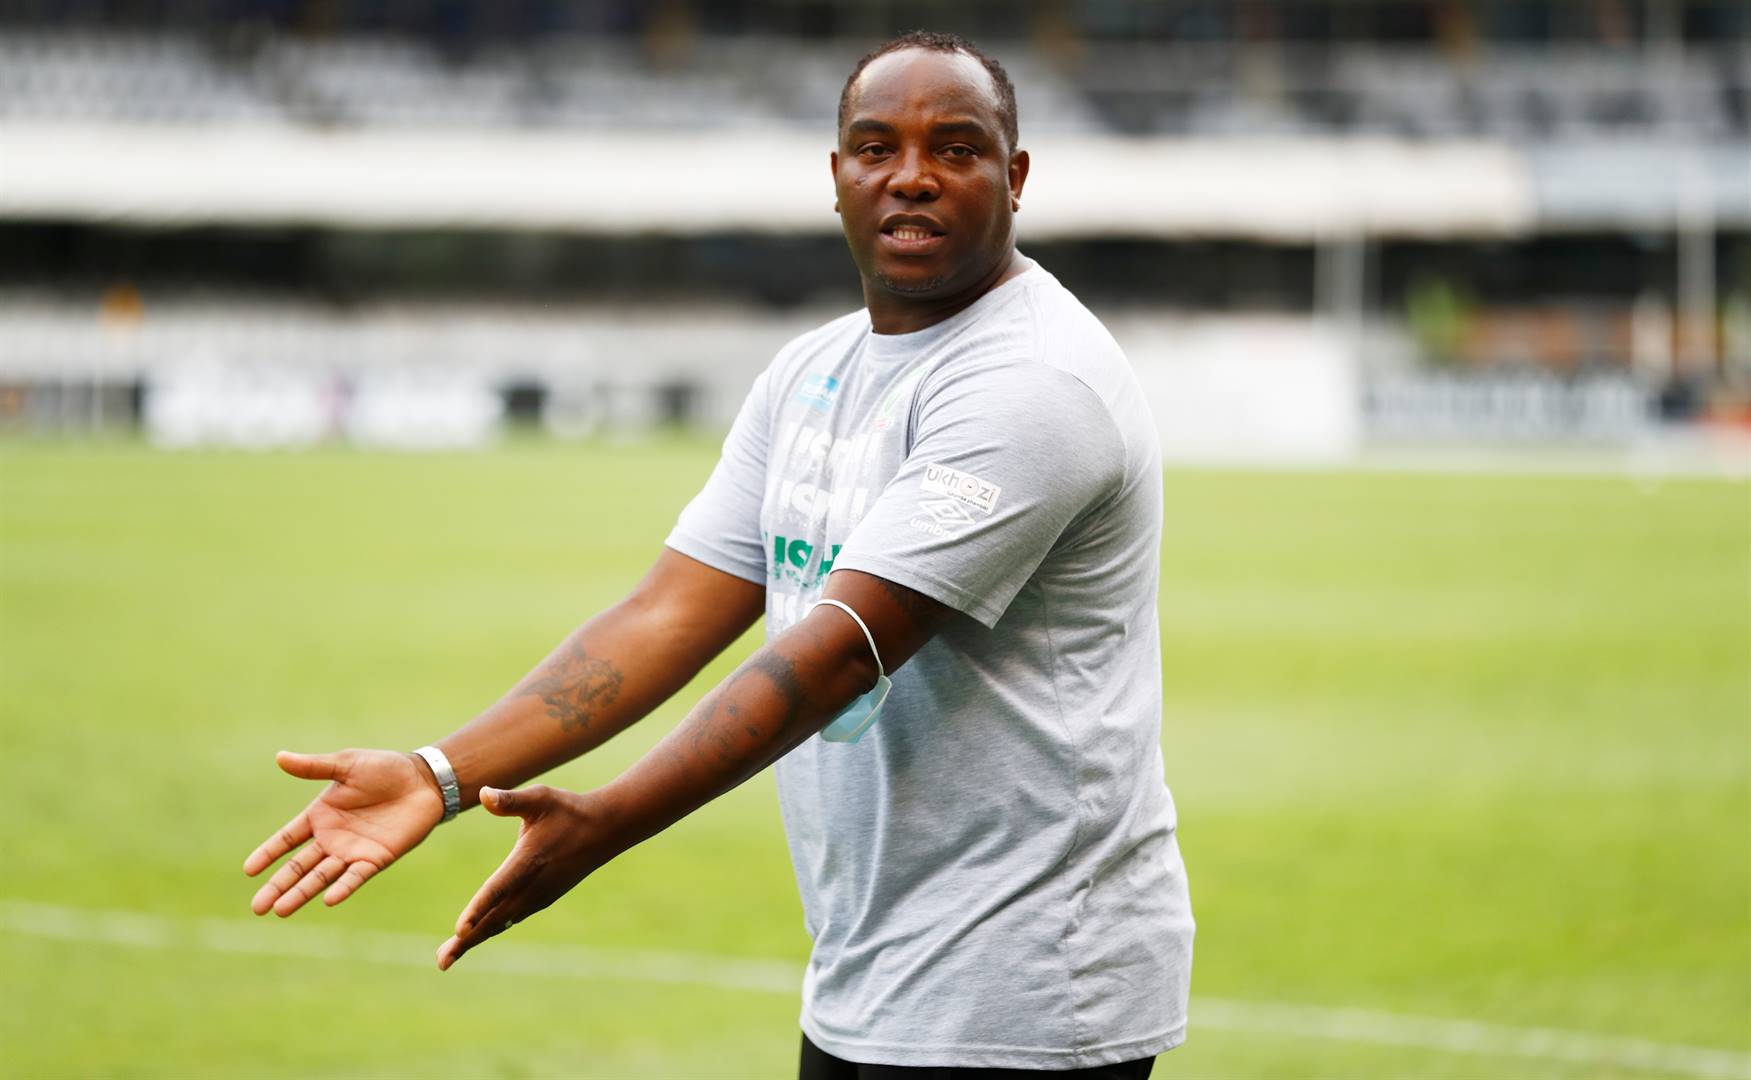 Benni McCarthy sounds confident ahead of AmaZulu’s clash against Kaizer Chiefs on Saturday. Photo: Steve Haag / BackPagepix 